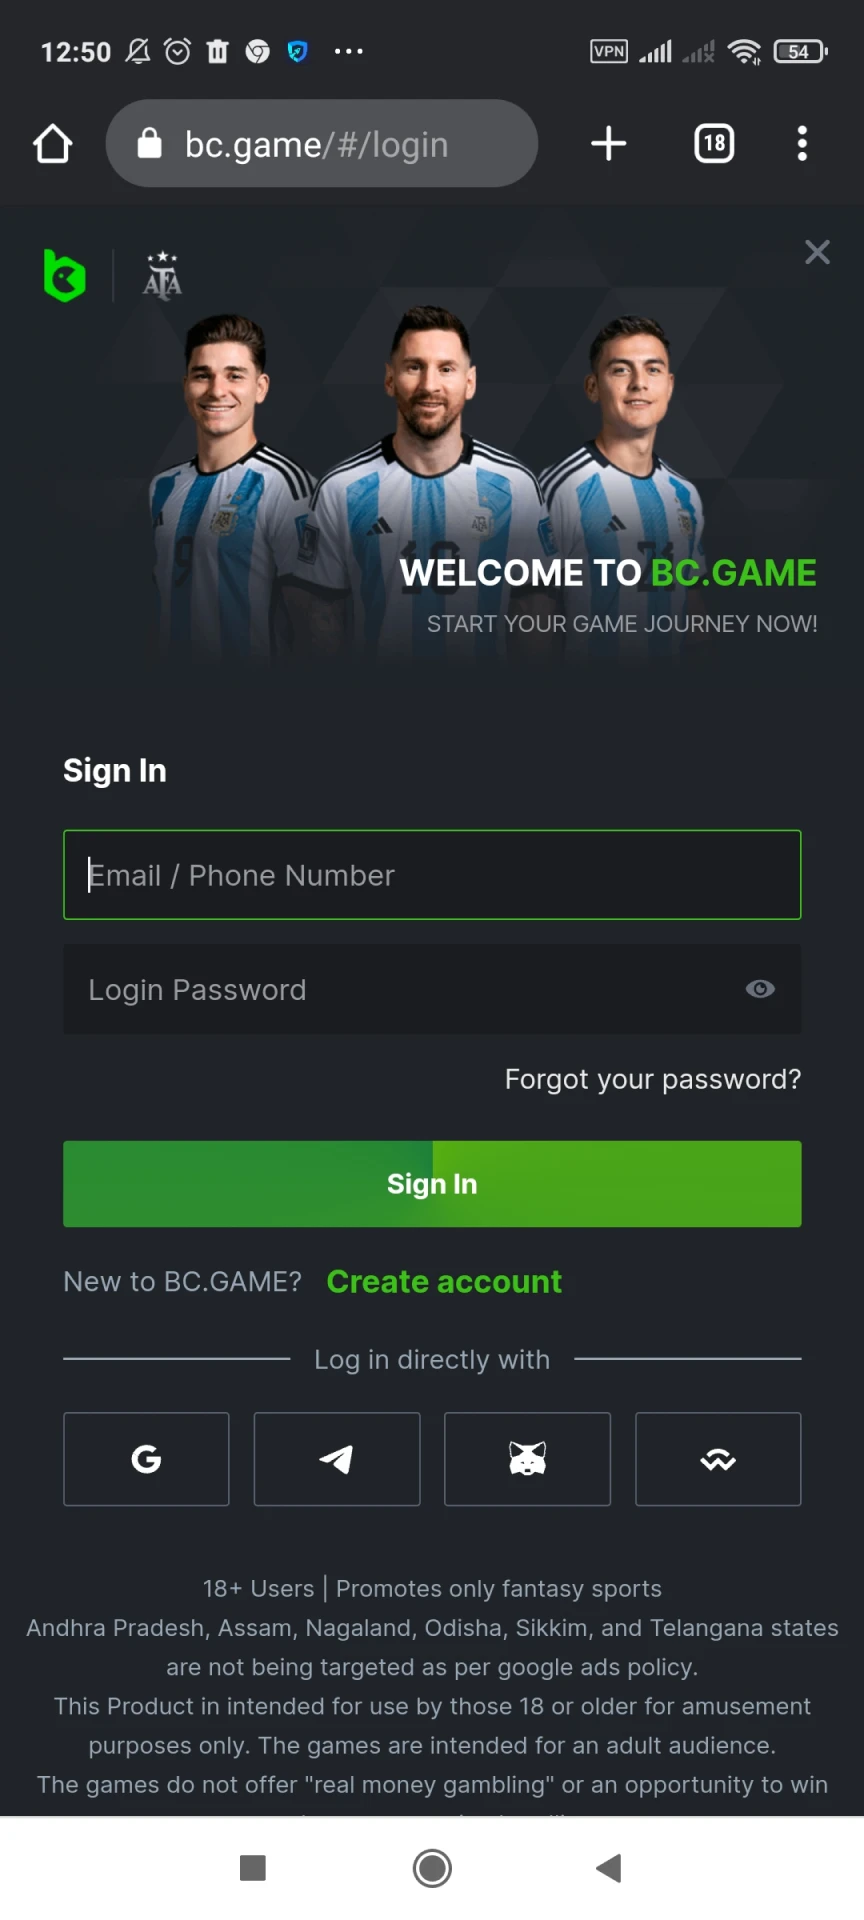 Sign in using BC Game account.